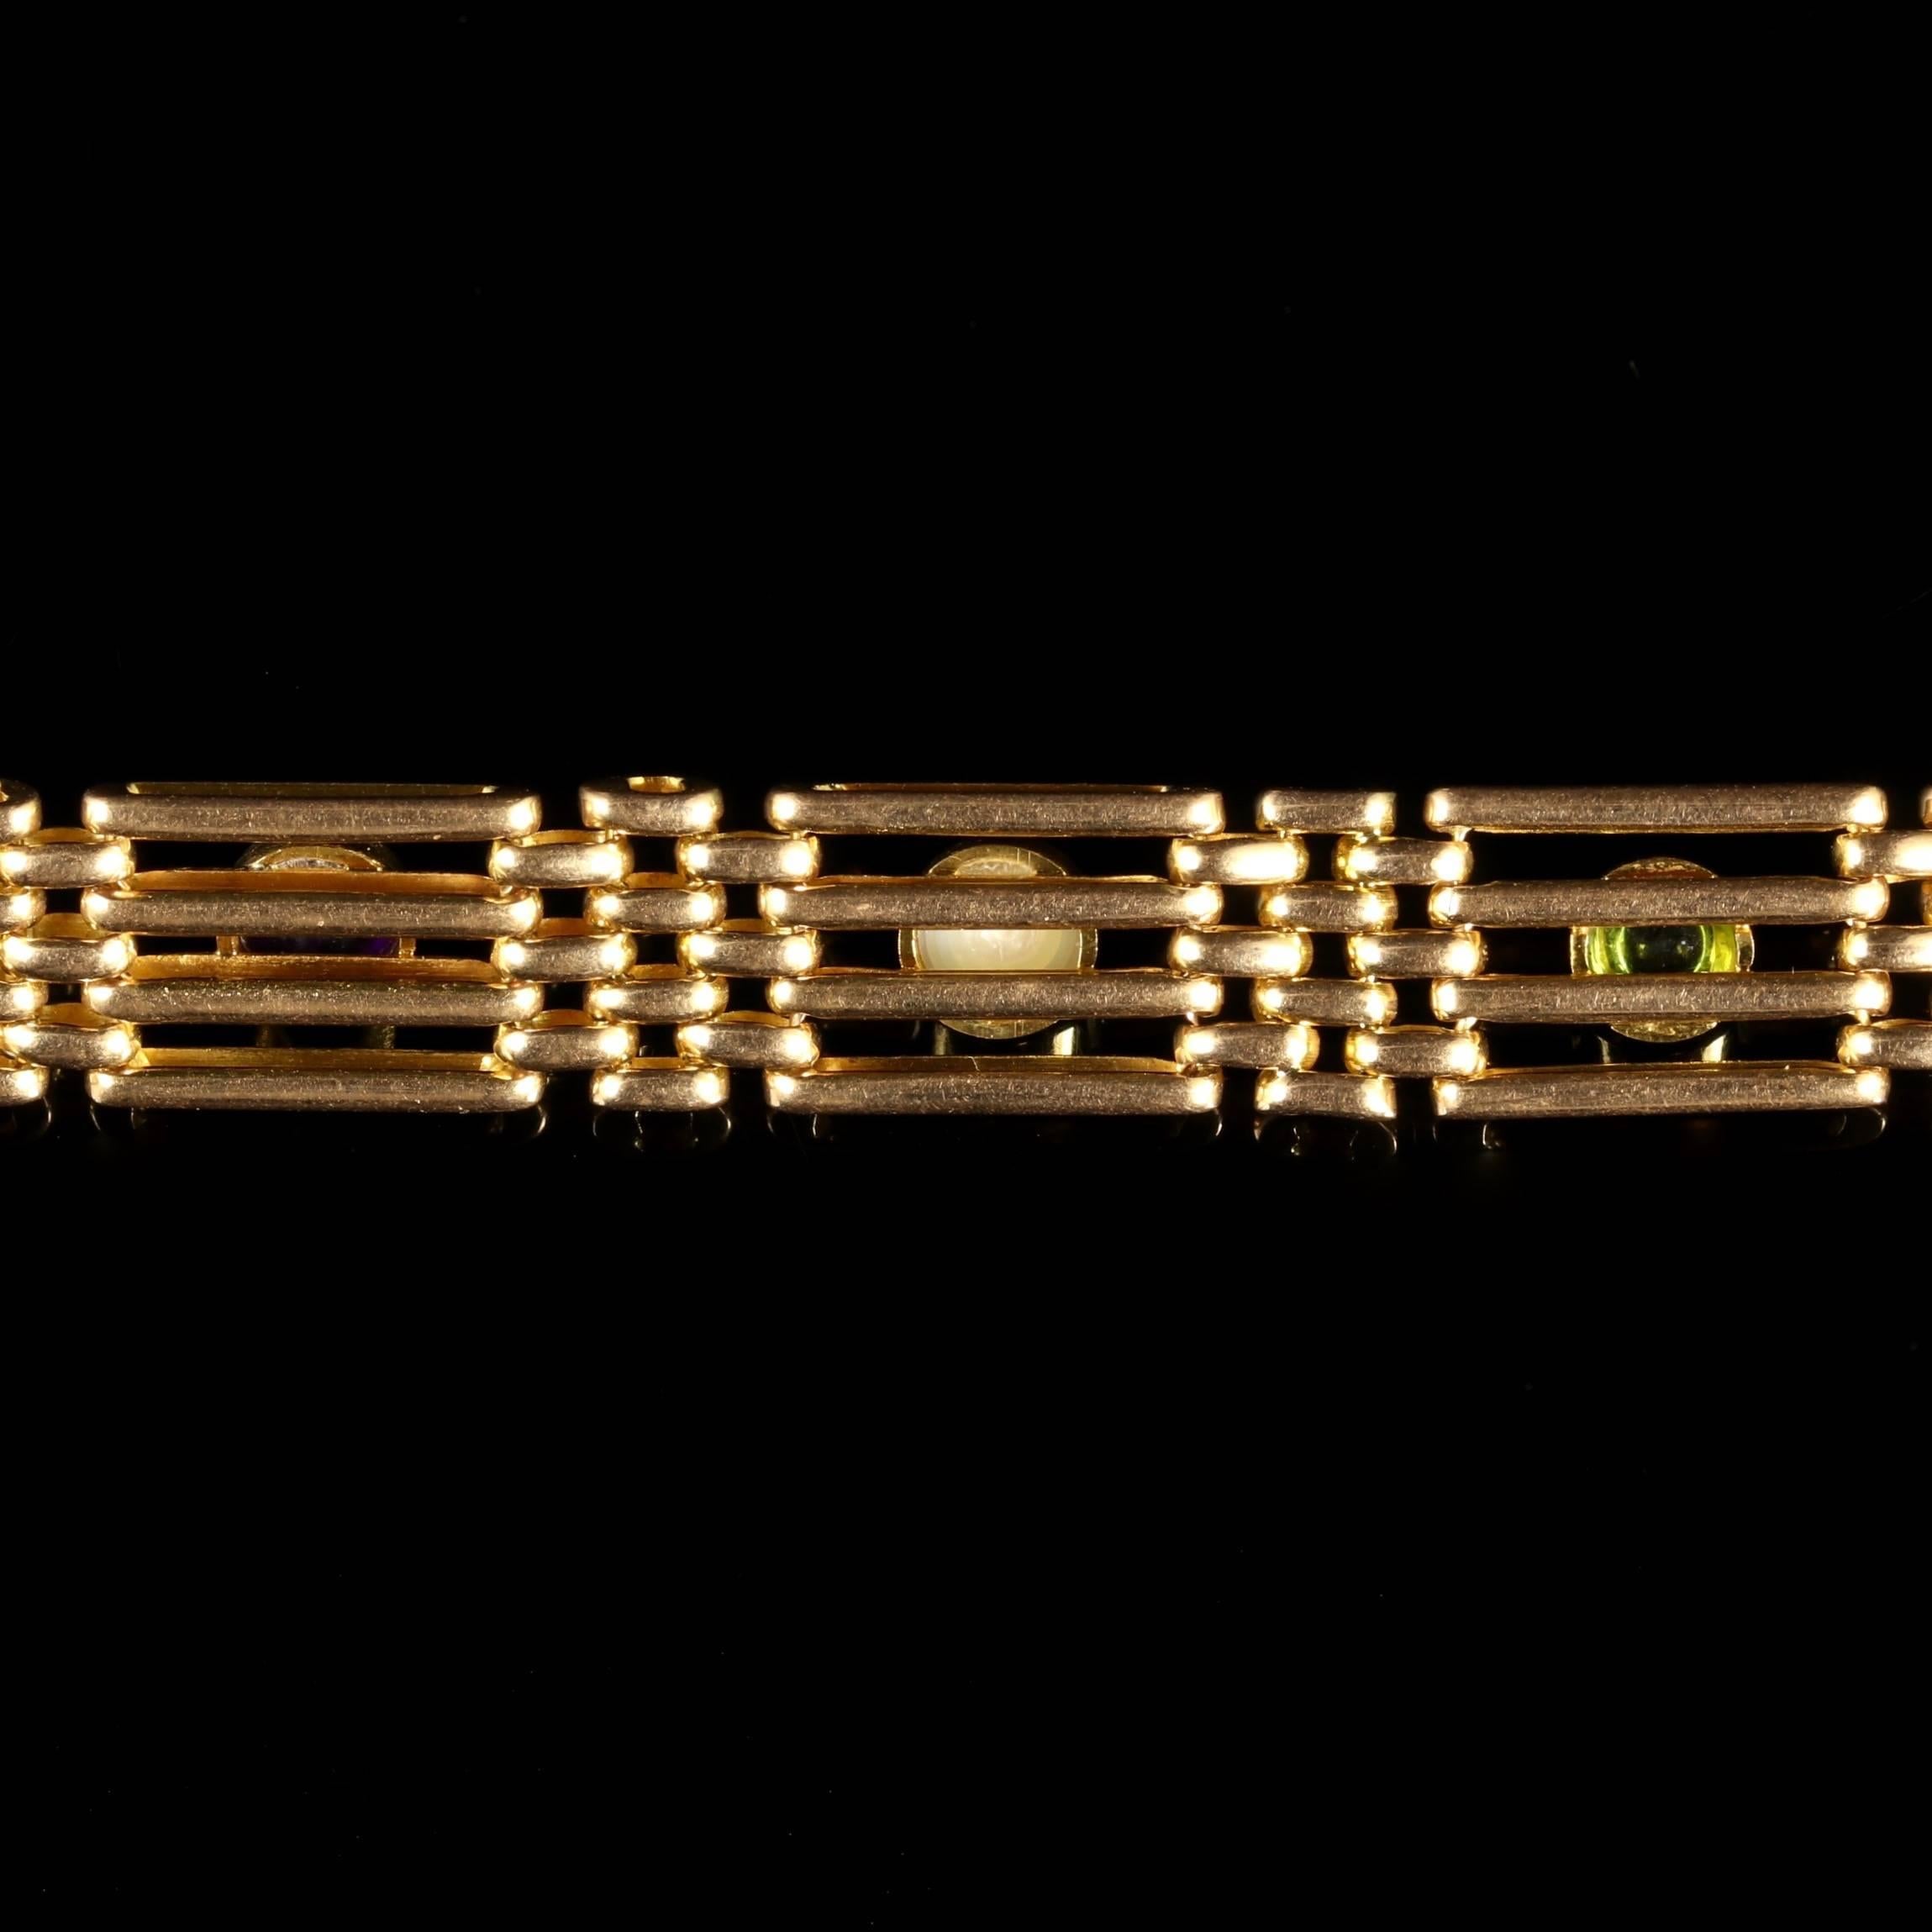 This genuine Victorian solid 15ct Gold Suffragette bracelet is Circa 1900.

Each detailed link is adorned with beautiful Peridots, Pearls and Amethyst’s. 

Suffragettes liked to be depicted as feminine, their jewellery was chosen to counter the